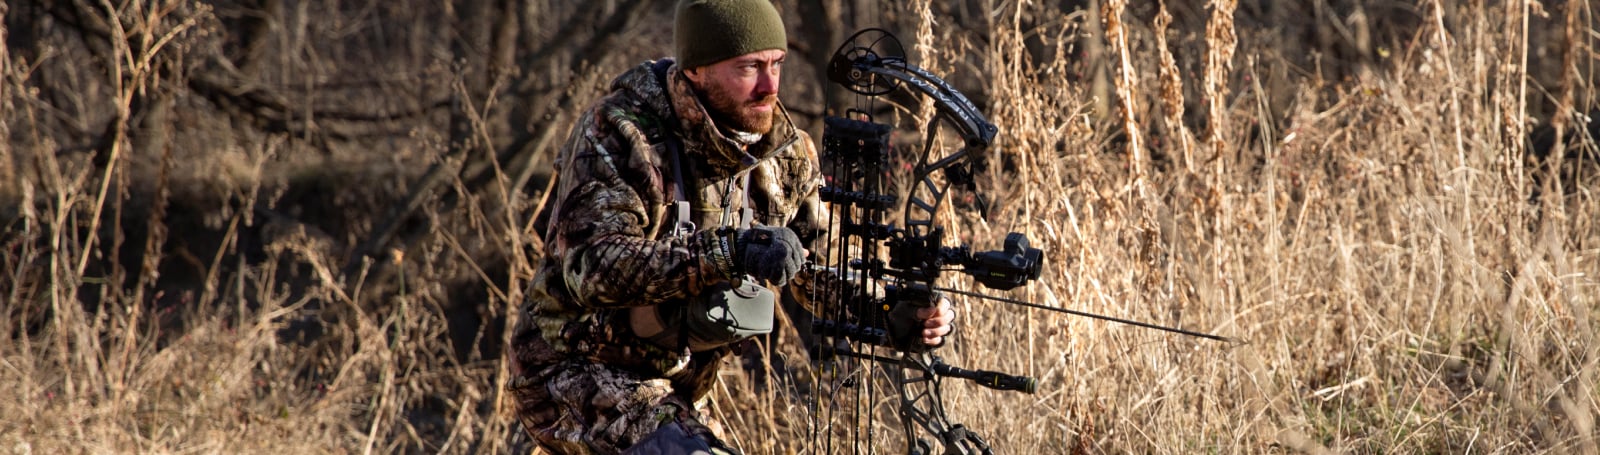 Sportsman Equipment, Tactical GPS, Bow Sight